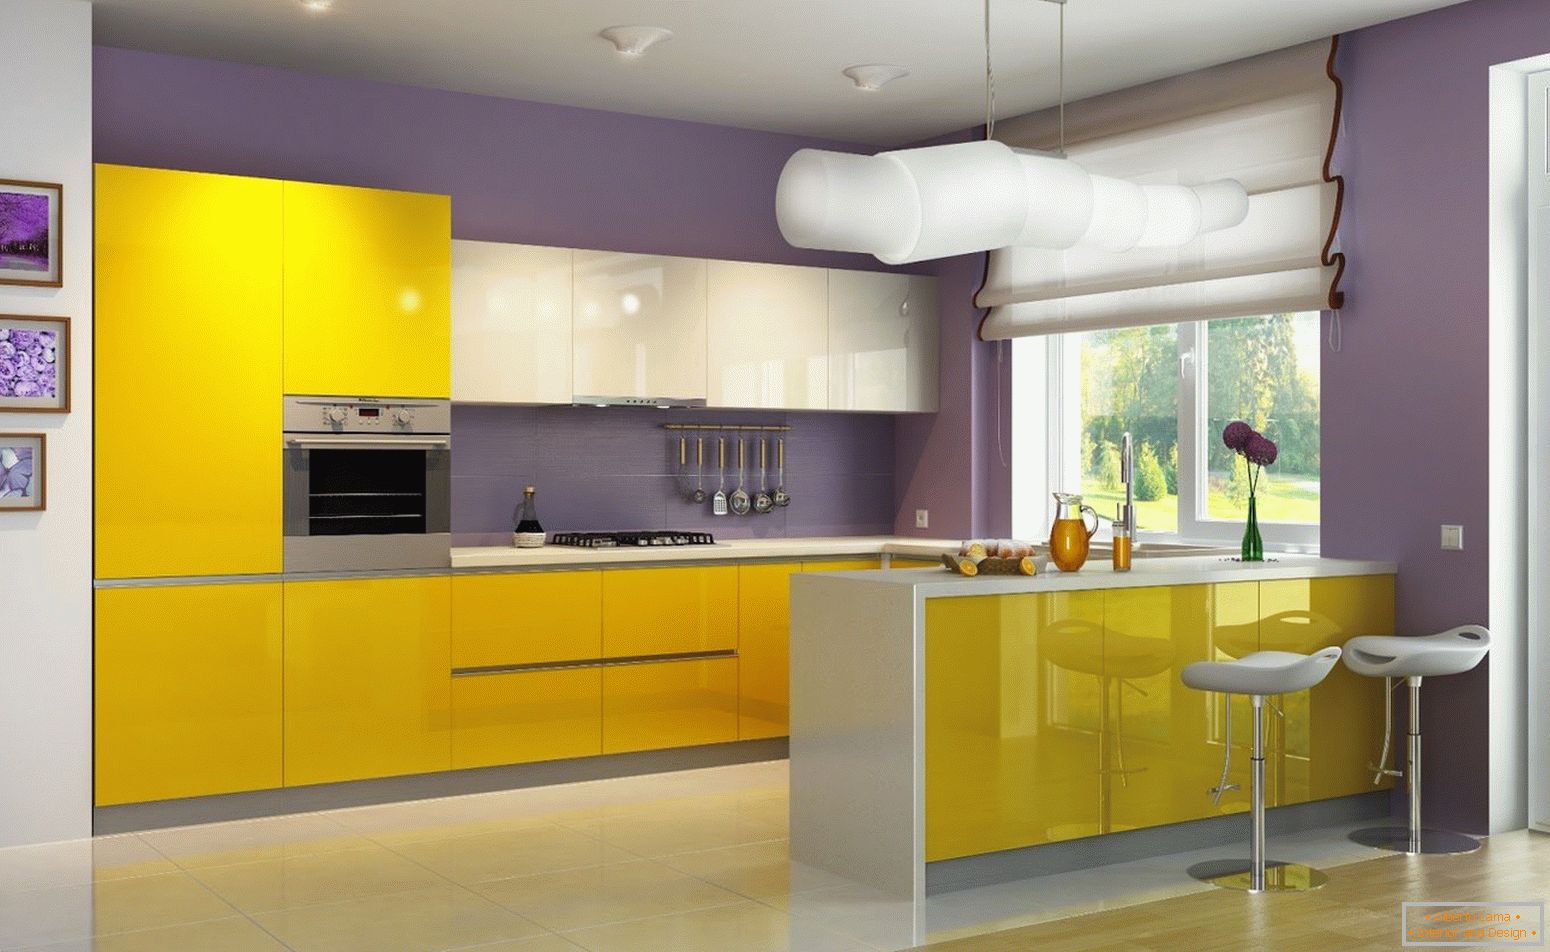 The combination of yellow and purple flowers in the kitchen